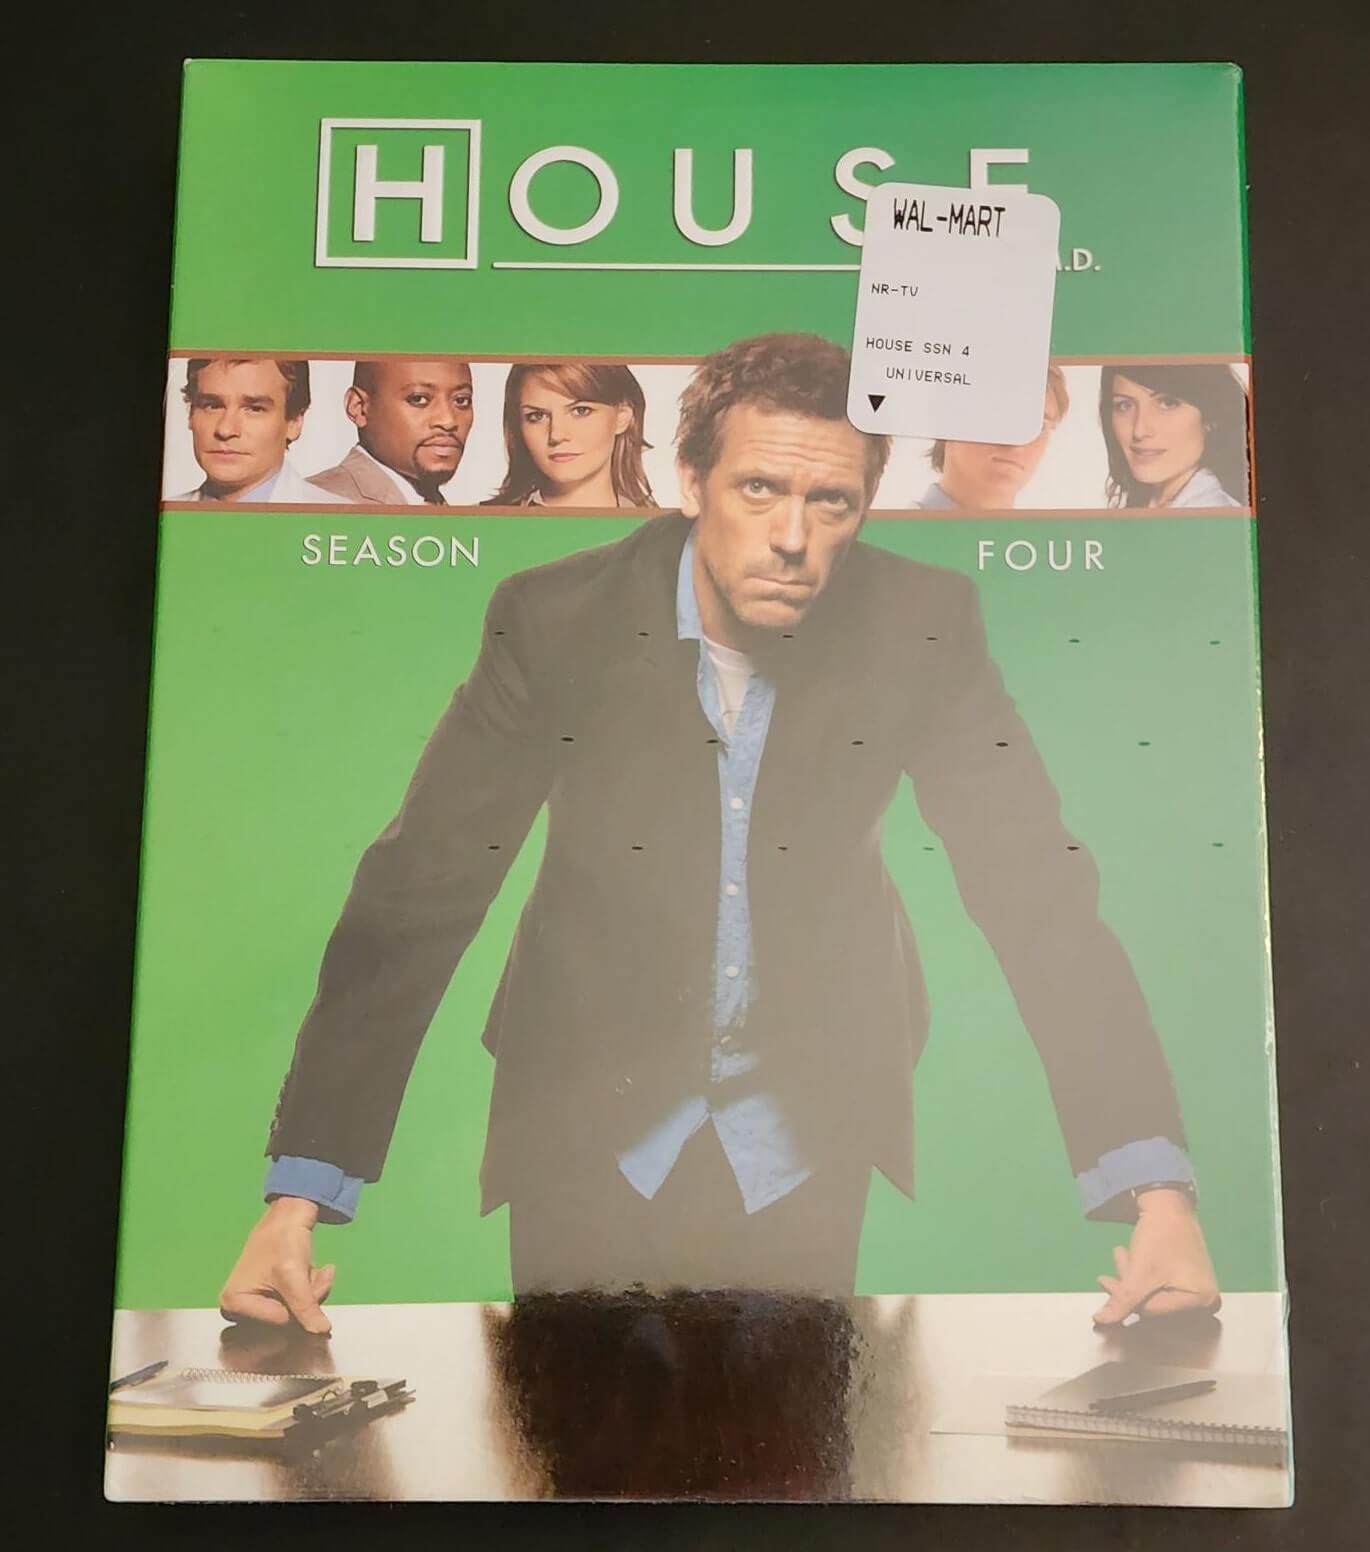 House Season 4 DVD box set: A collection of DVDs containing the fourth season of the TV show "House".